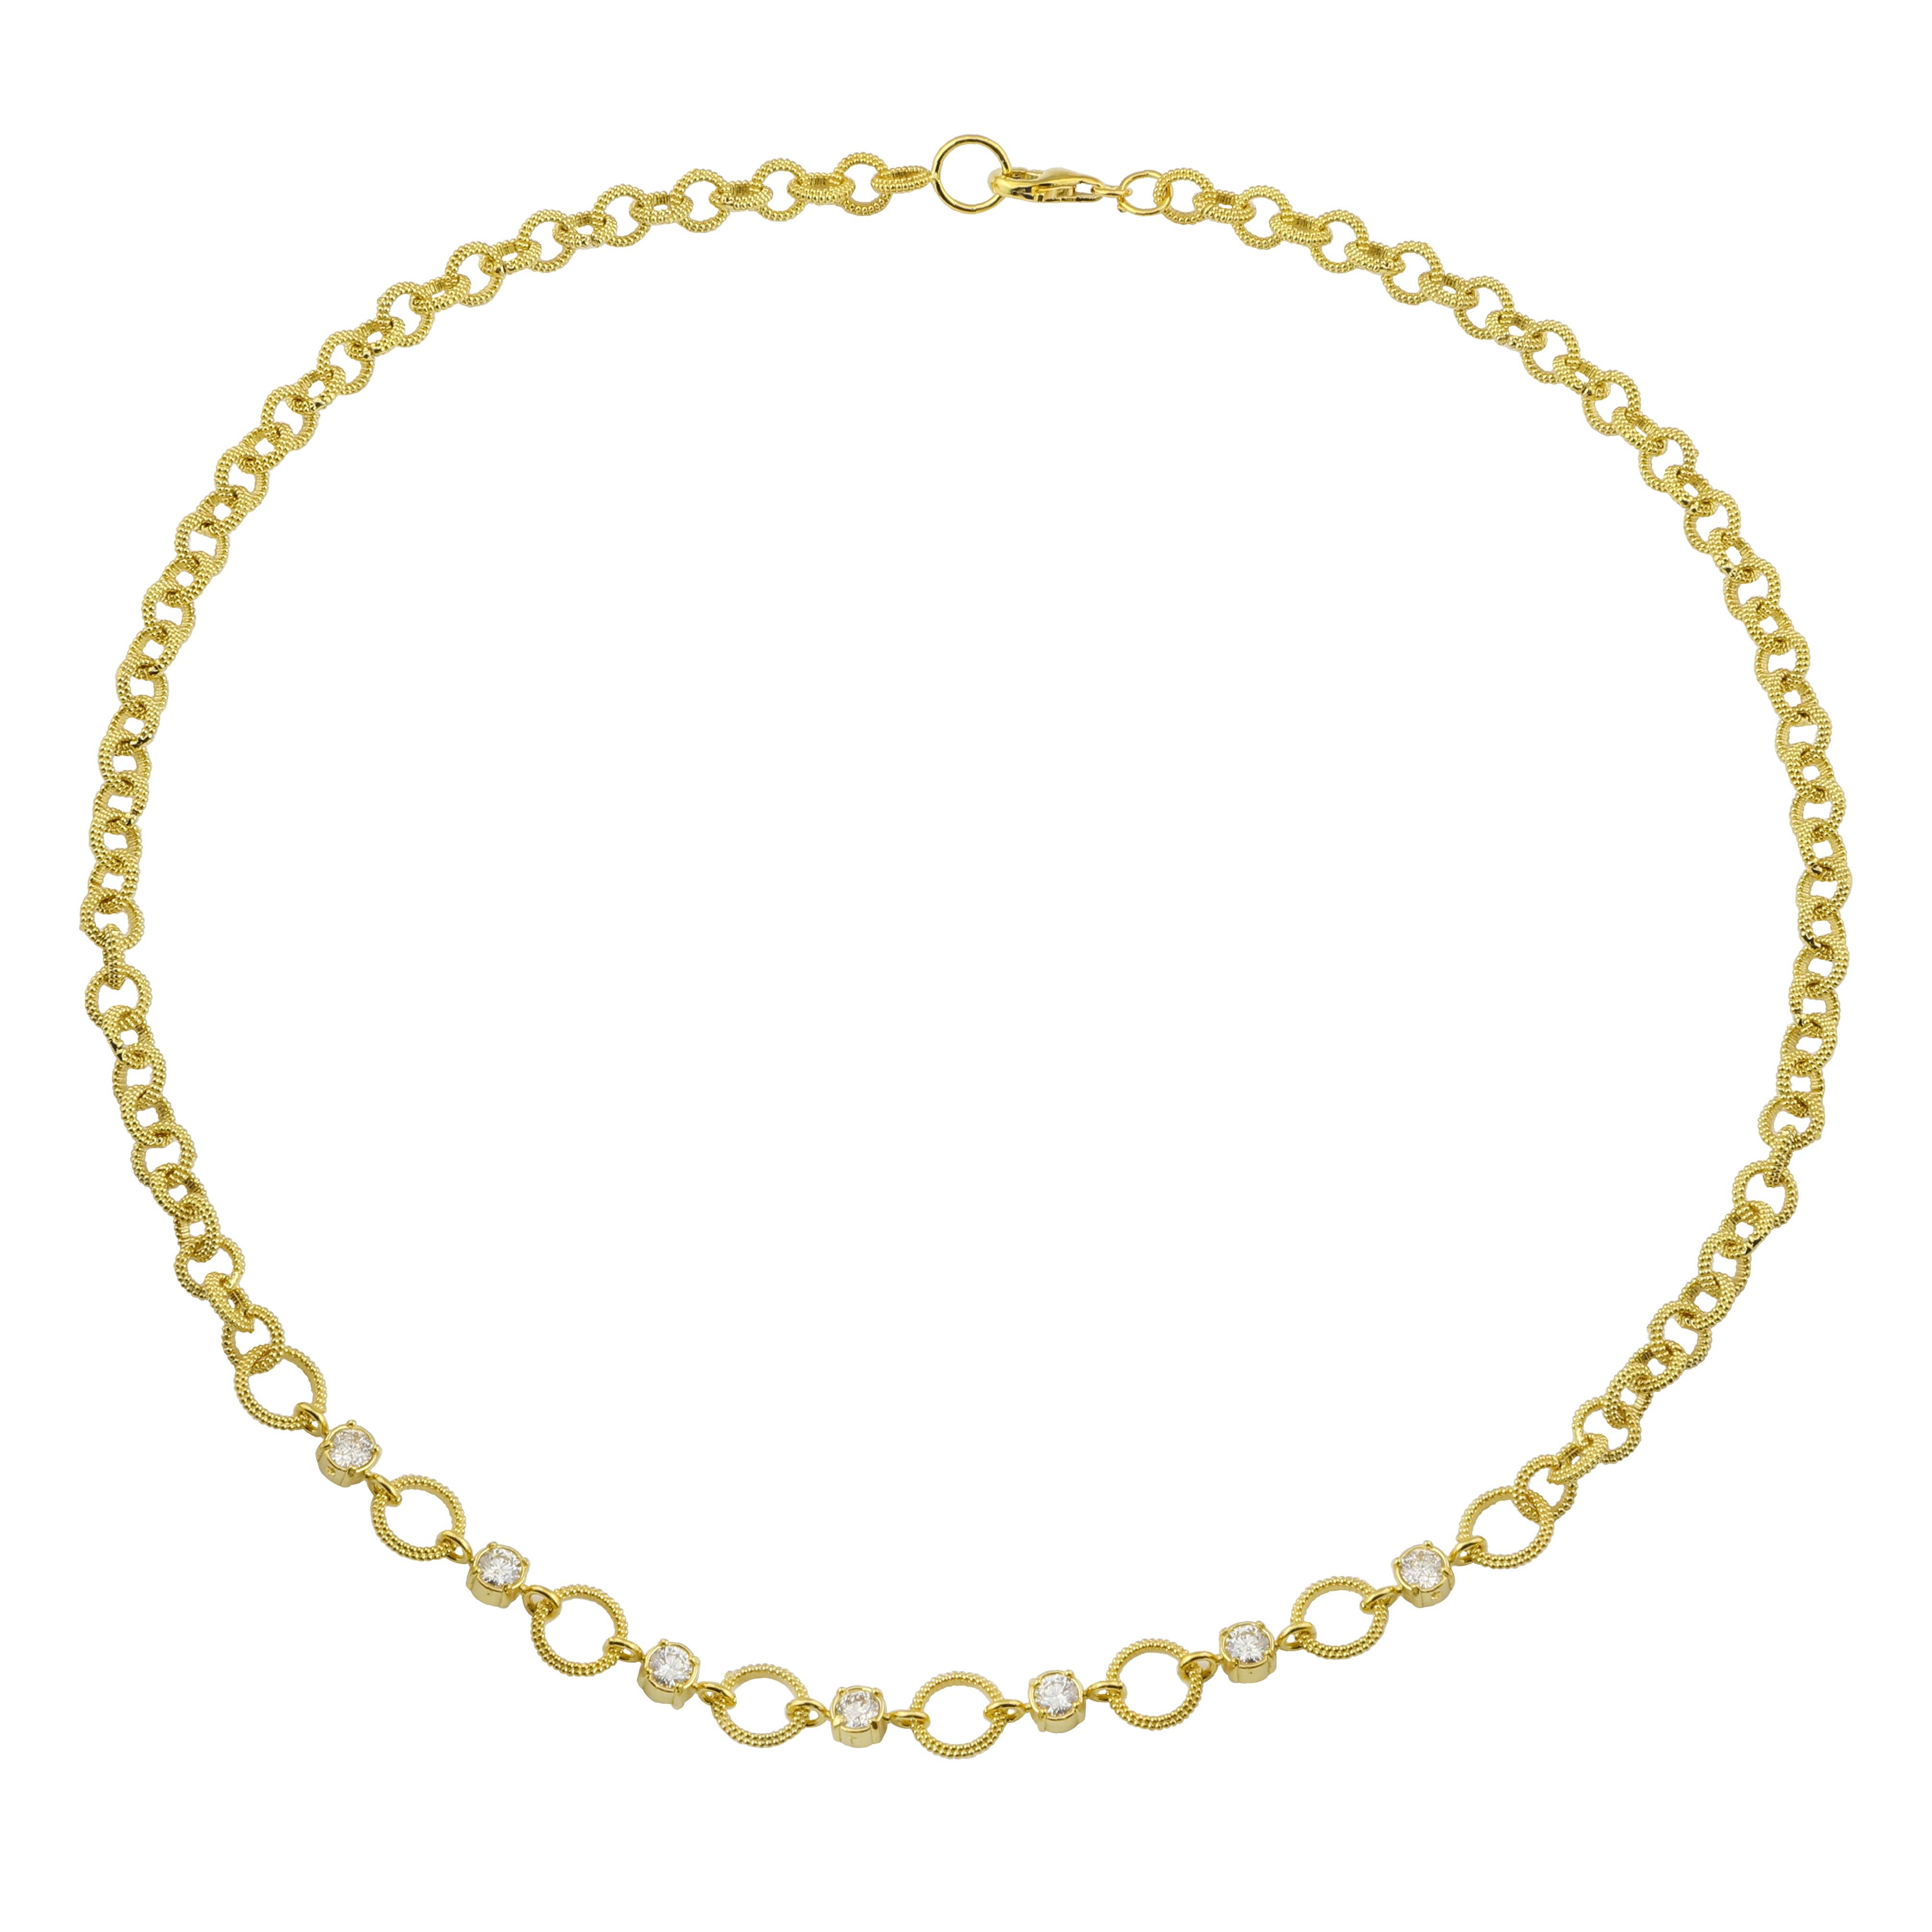 Etruscan Round Granulated Link Necklace with Diamonds in 18k Yellow Gold designed by Amyn The Jeweler.

7 Diamonds

16 inch

NKETRURNDDIALINK

Made with passion in Los Angeles